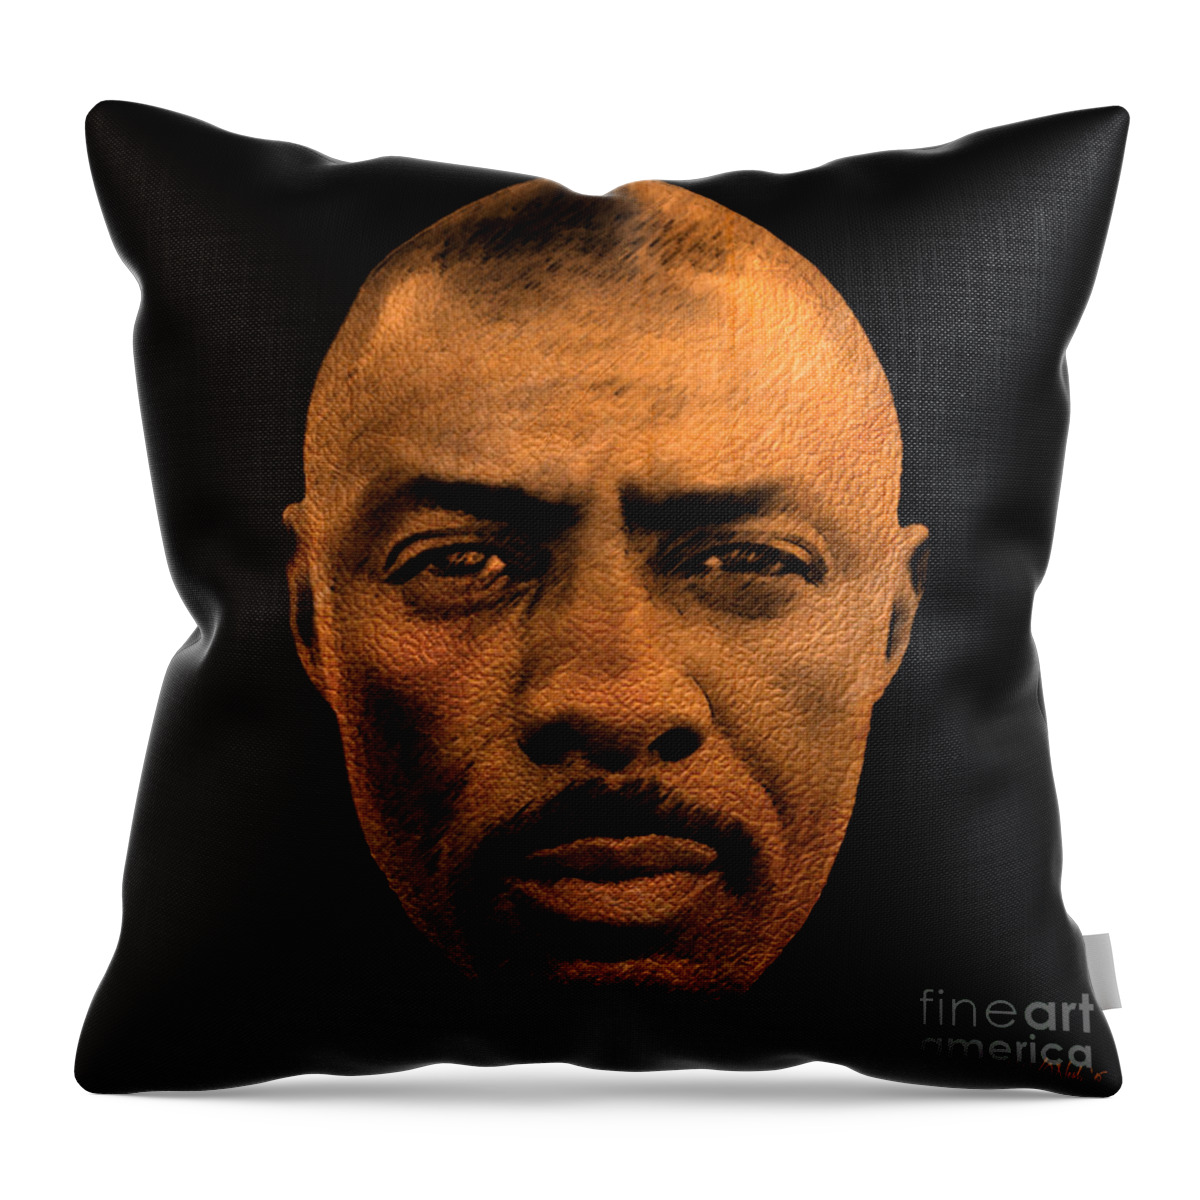 Faces Throw Pillow featuring the digital art Idris Elba by Walter Neal